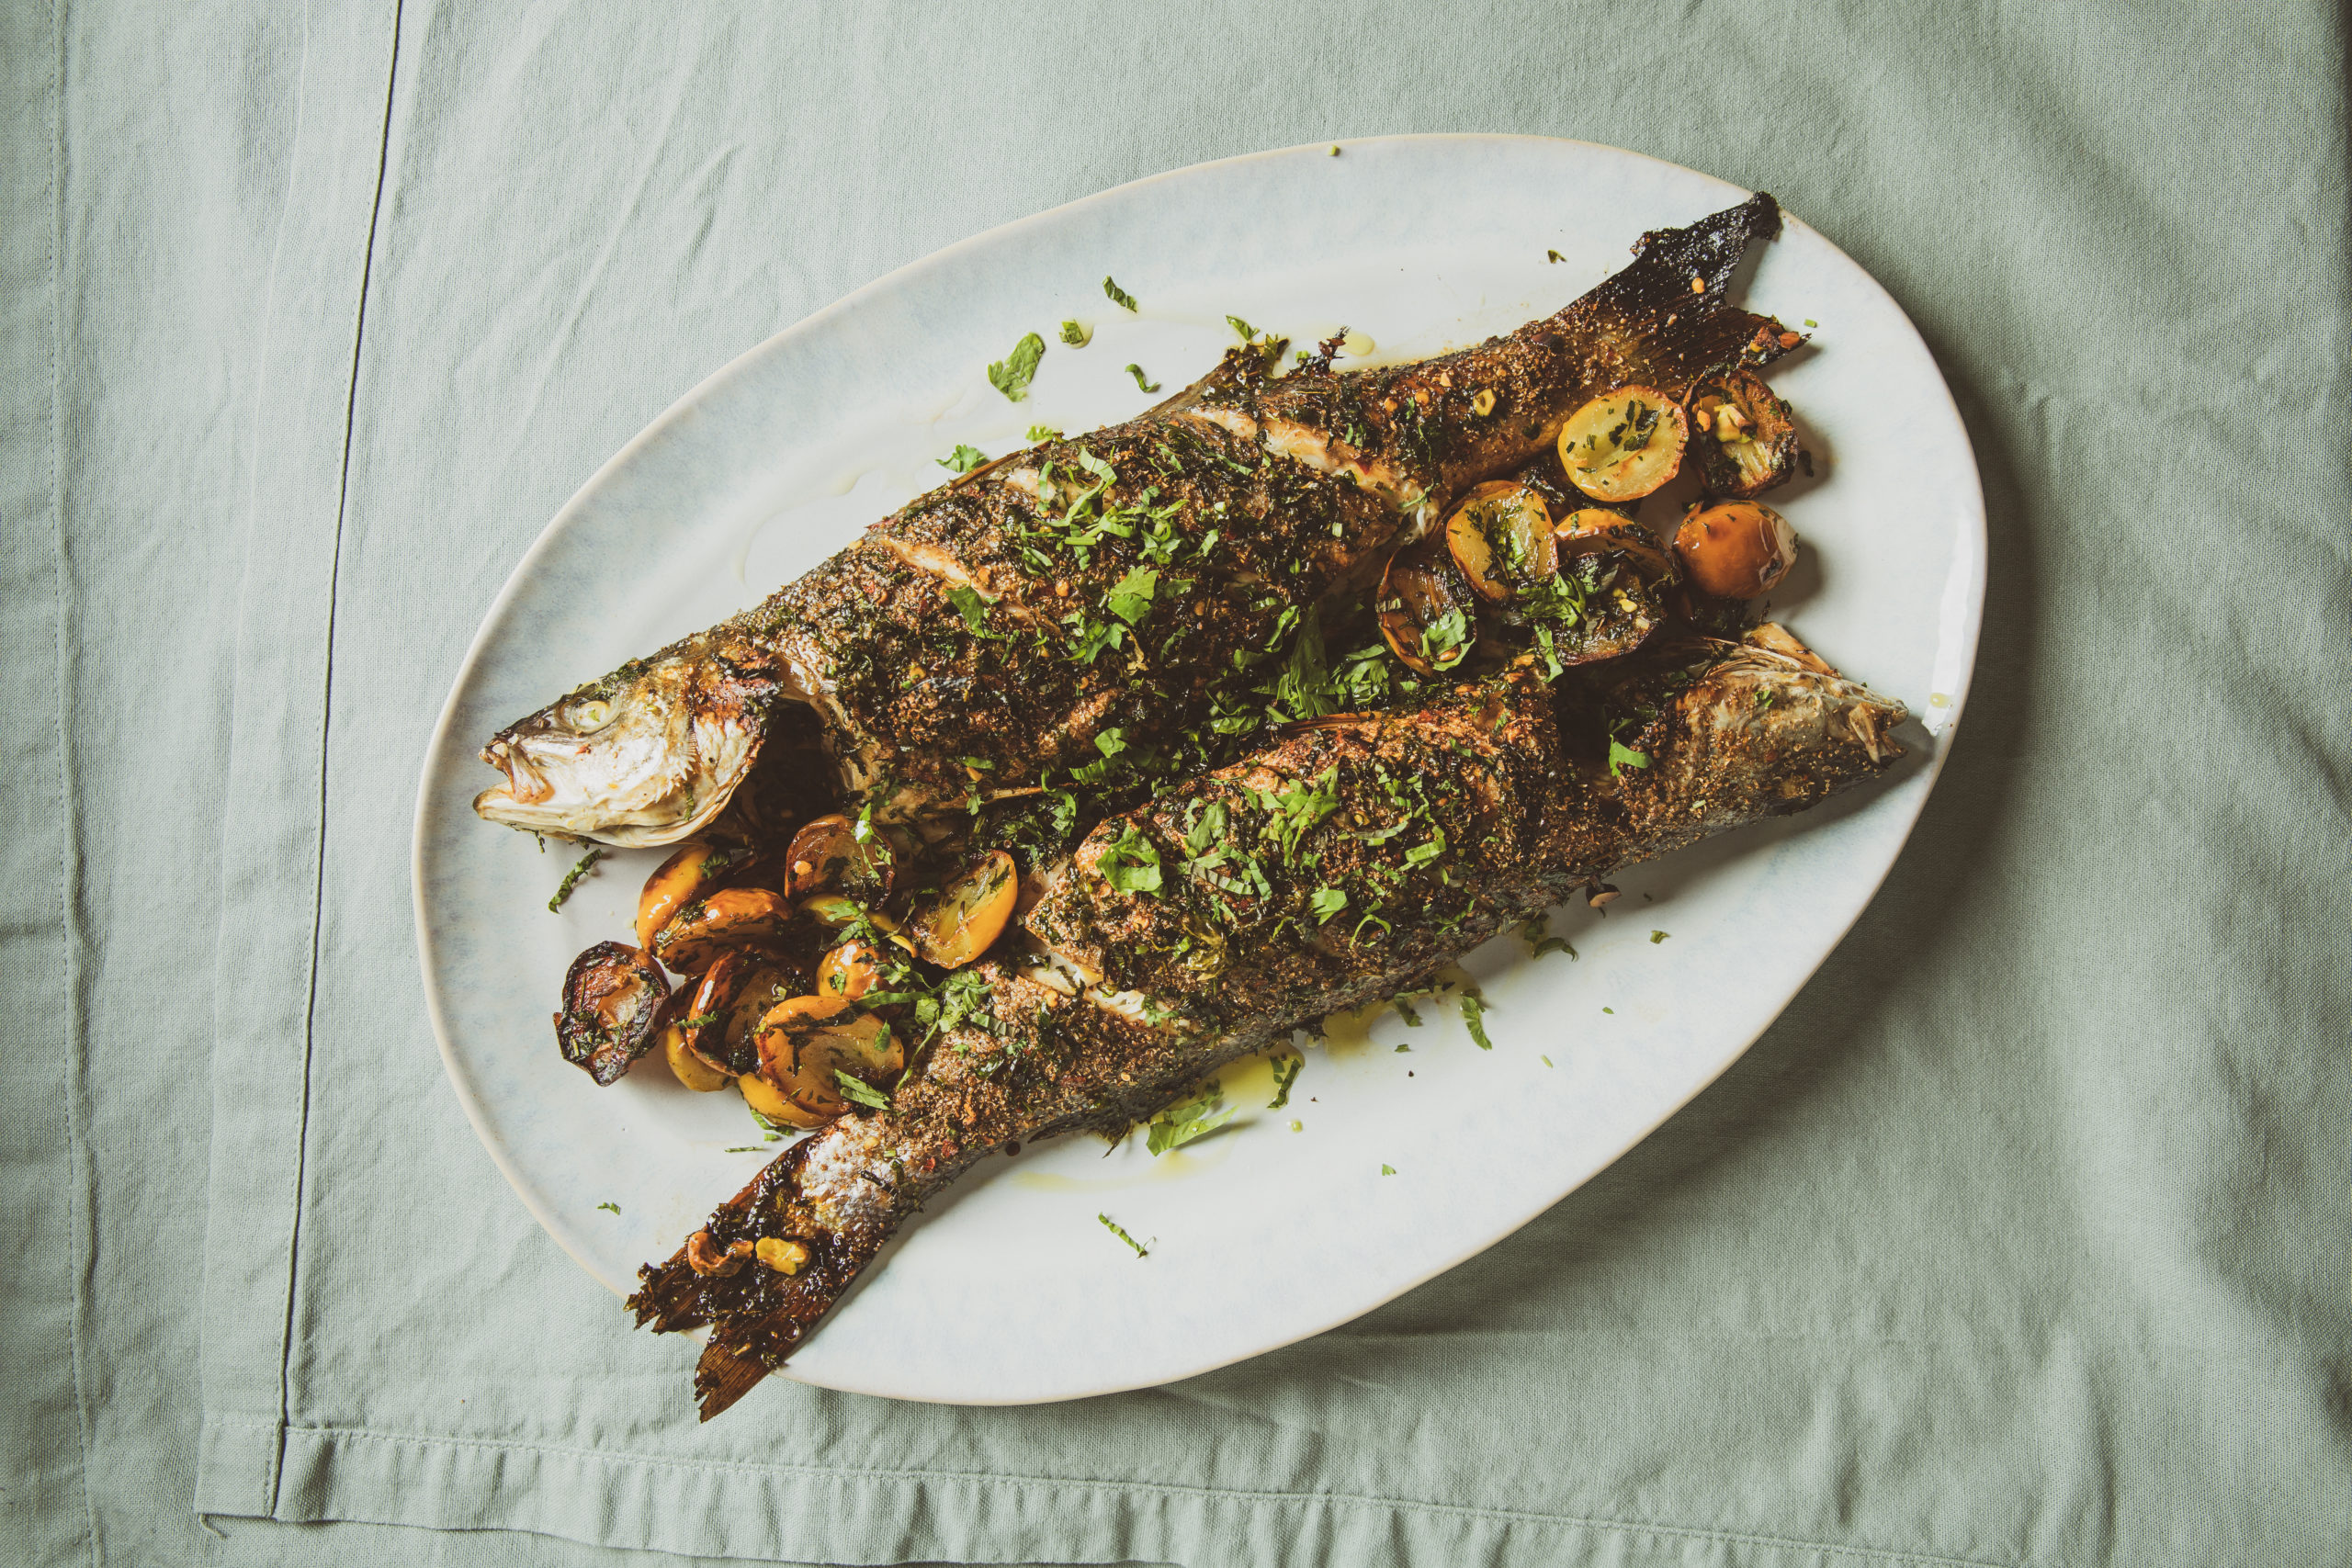 Roasted whole fish with pomegranate molasses on a white platter